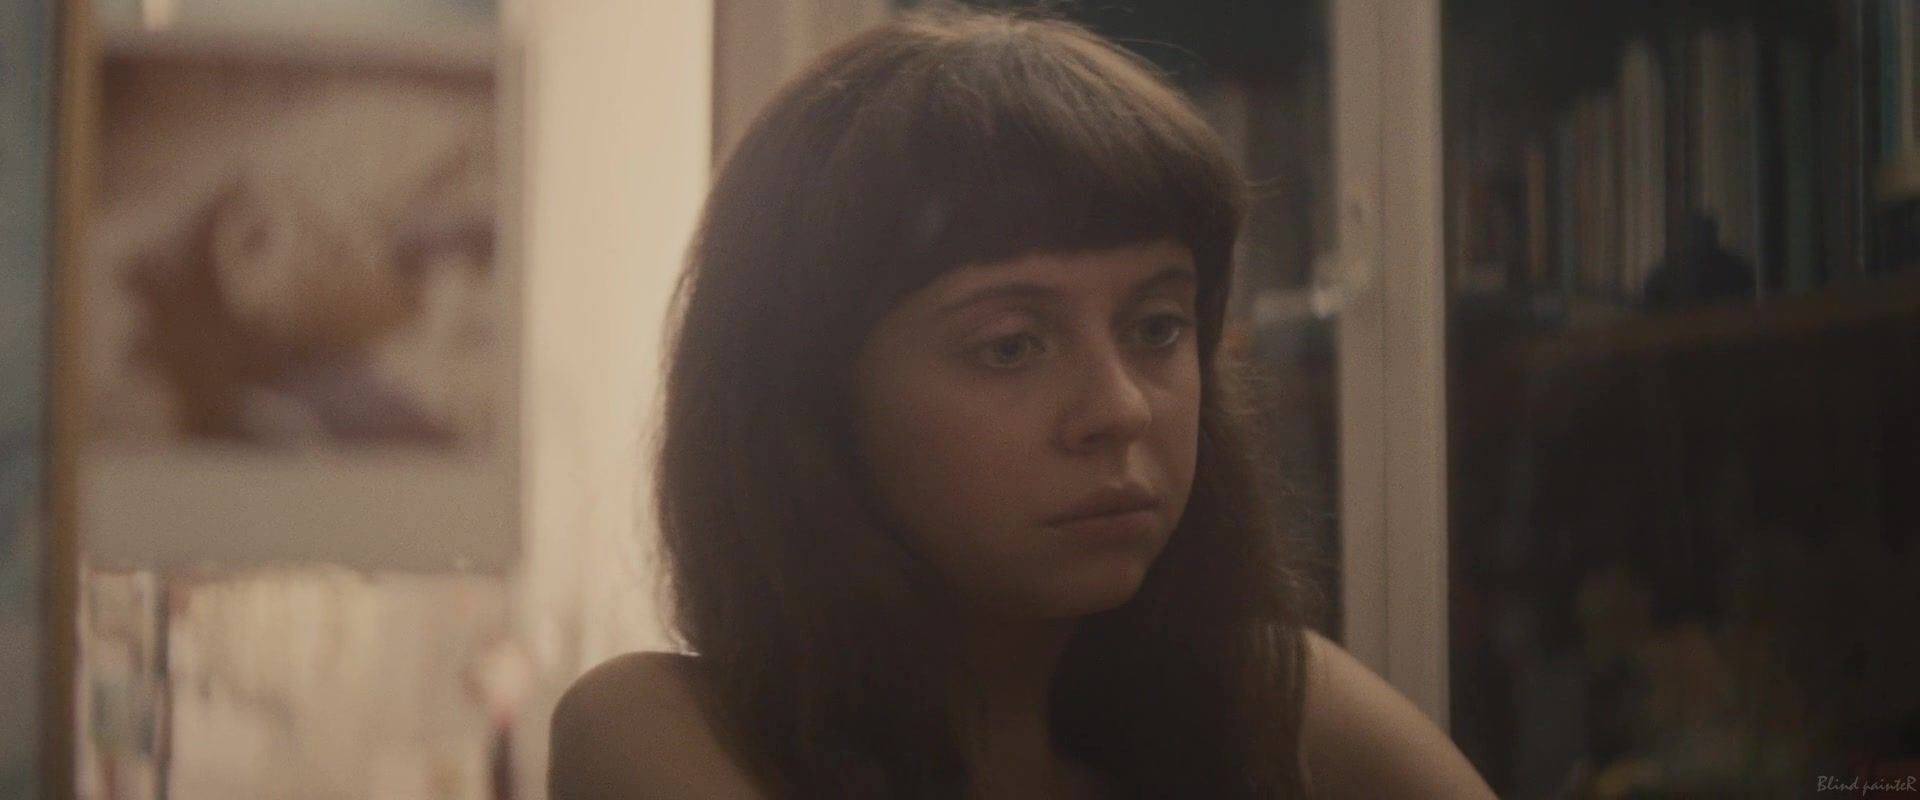 French Porn Bel Powley - The Diary Of A Teenage Girl (2015) Porndig